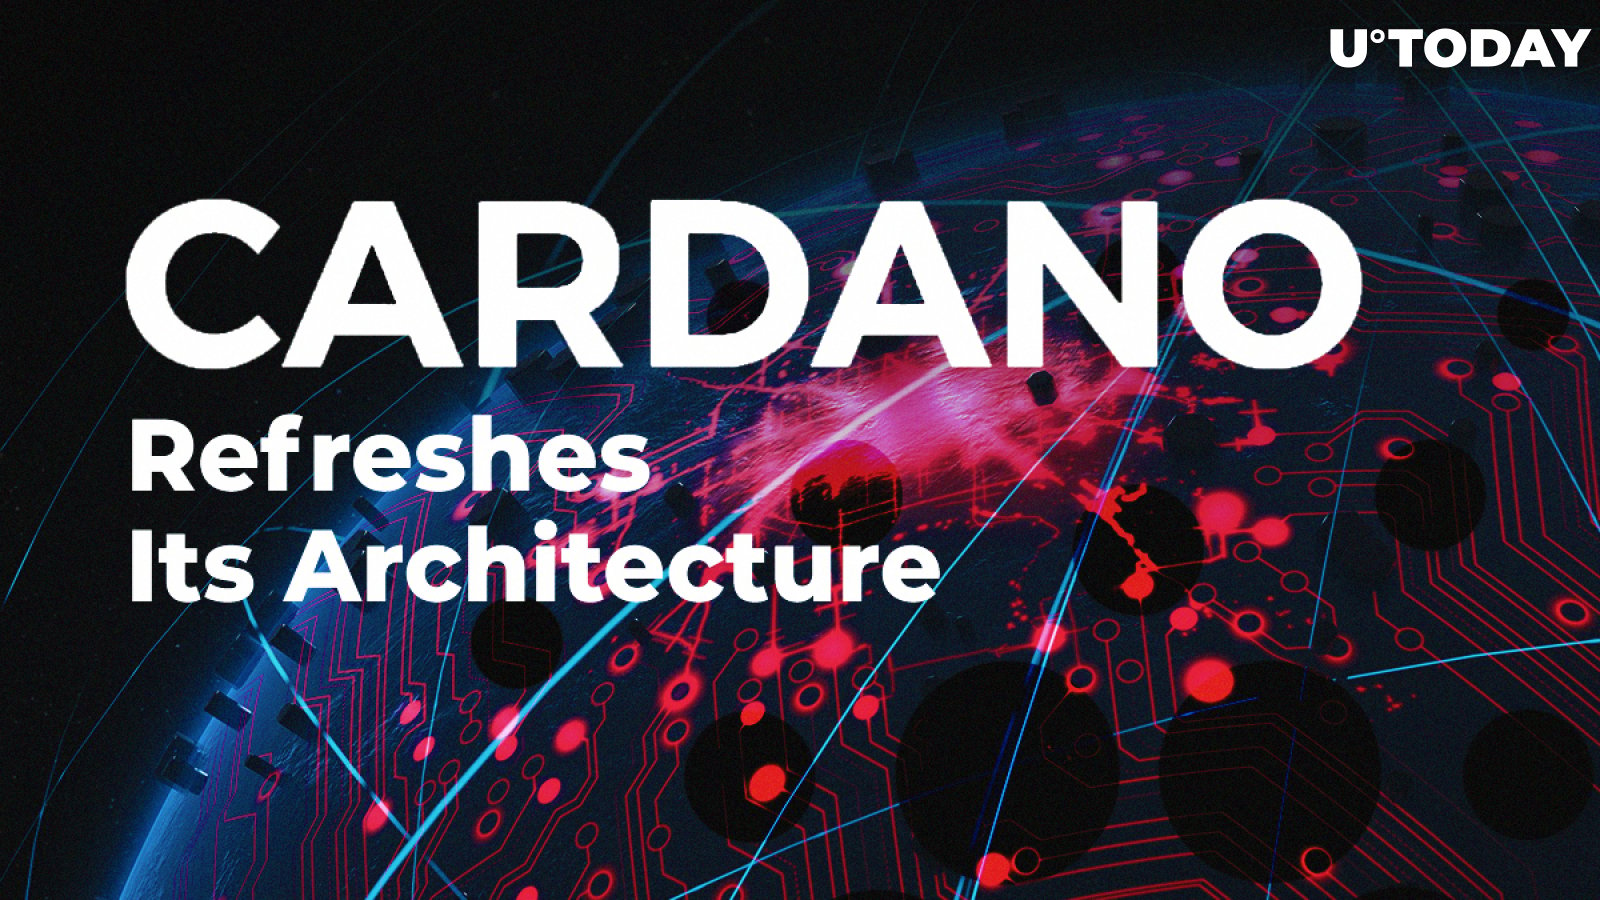 Cardano (ADA) Refreshes Its Architecture by Kicking Off New Node